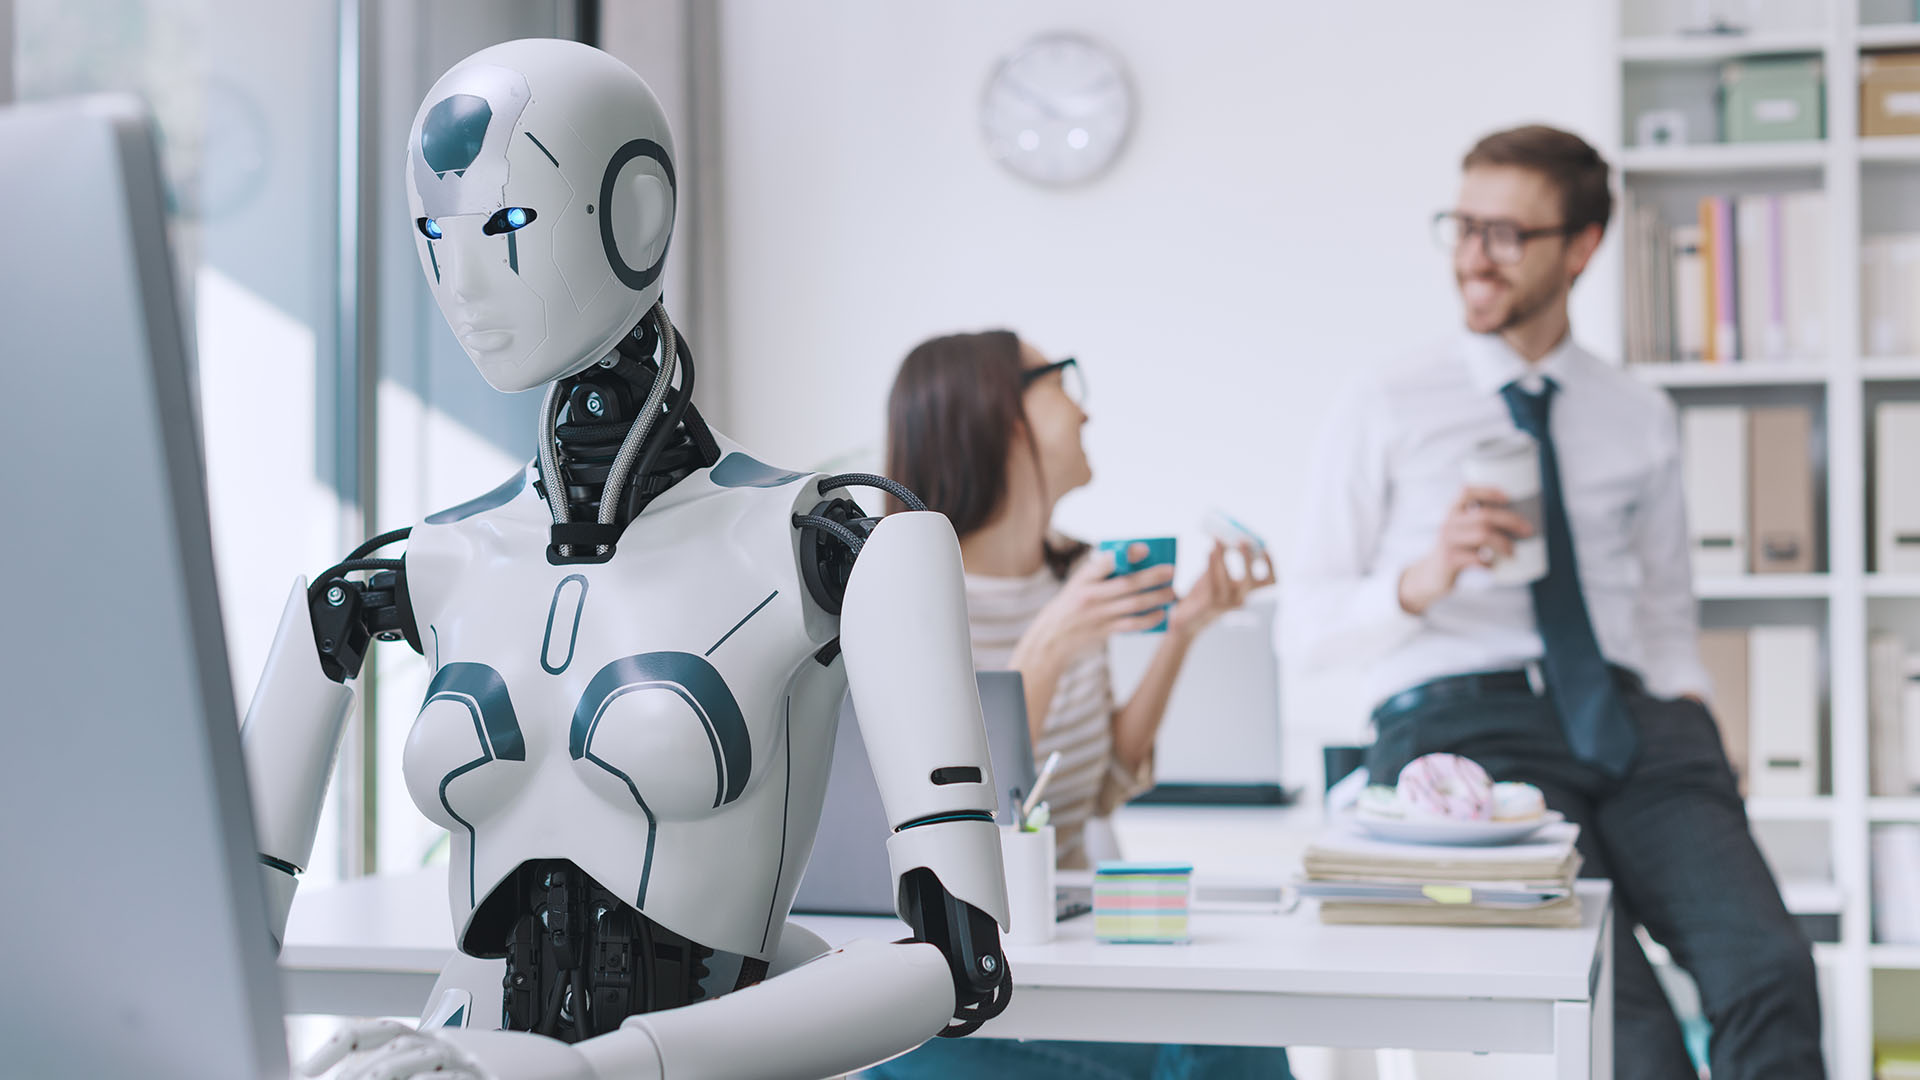 A humanoid robot works at a desk with a computer, while two people in the background converse and laugh in a modern office setting.